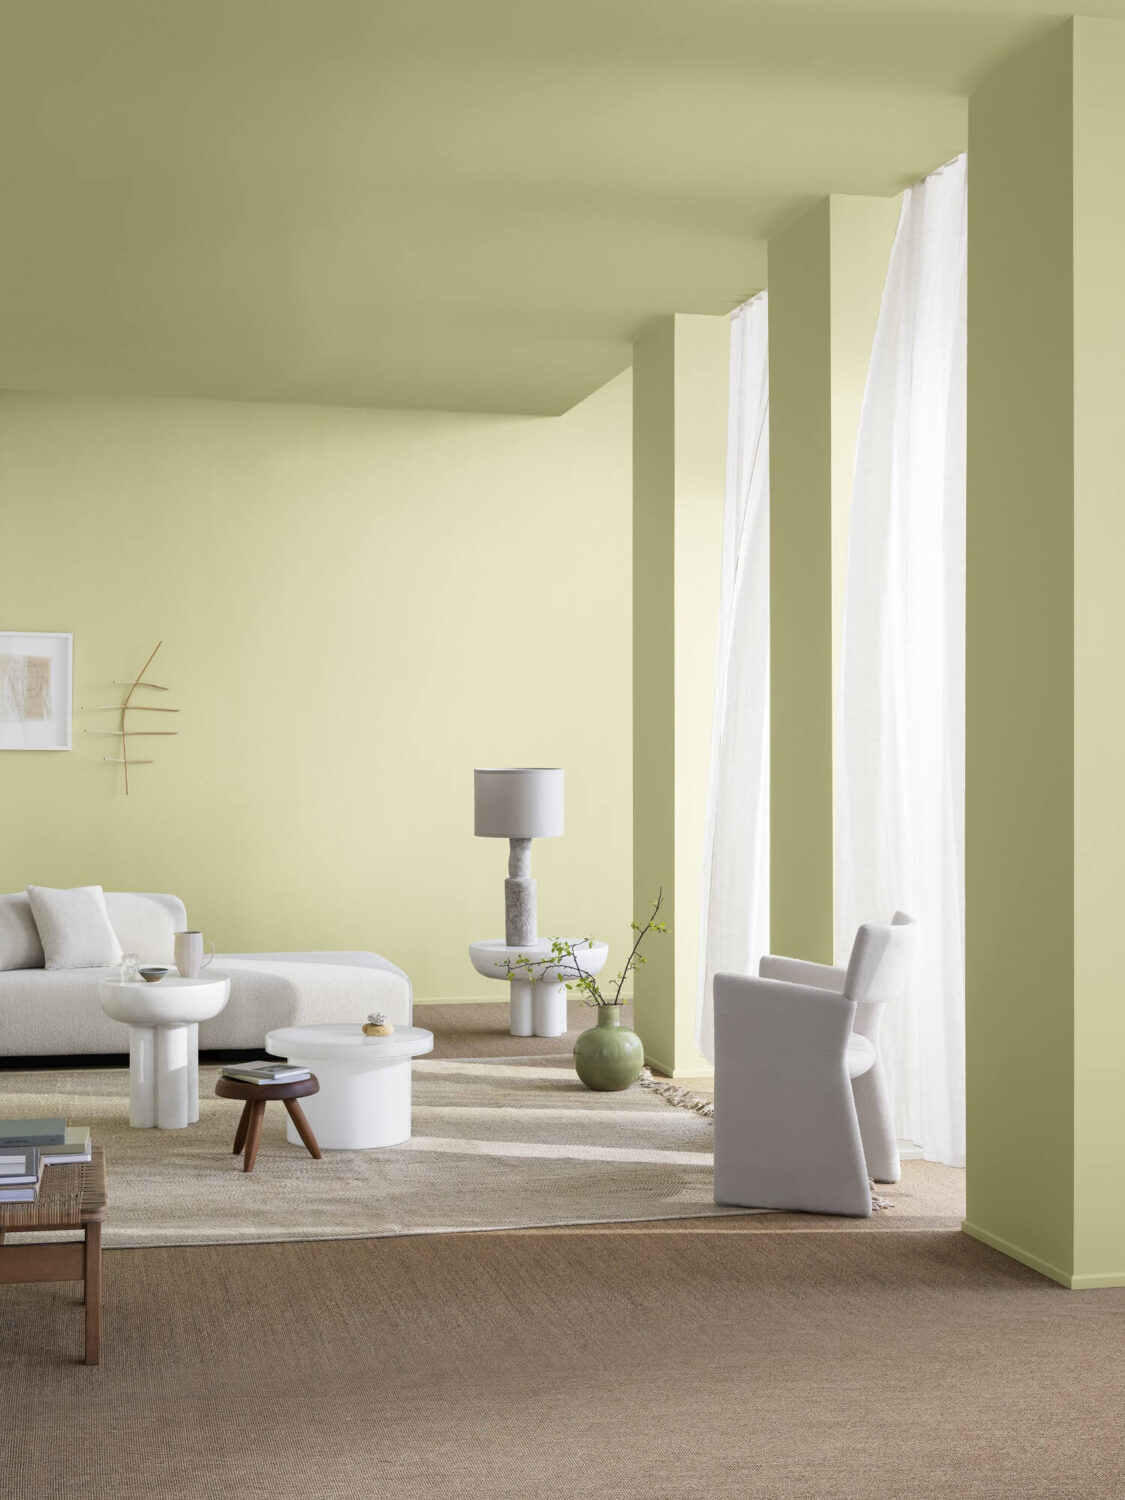 Jotun LADY color palette 8087 vaarluft nordroom The Color Trends for 2023: Rich & Warm Natural Hues